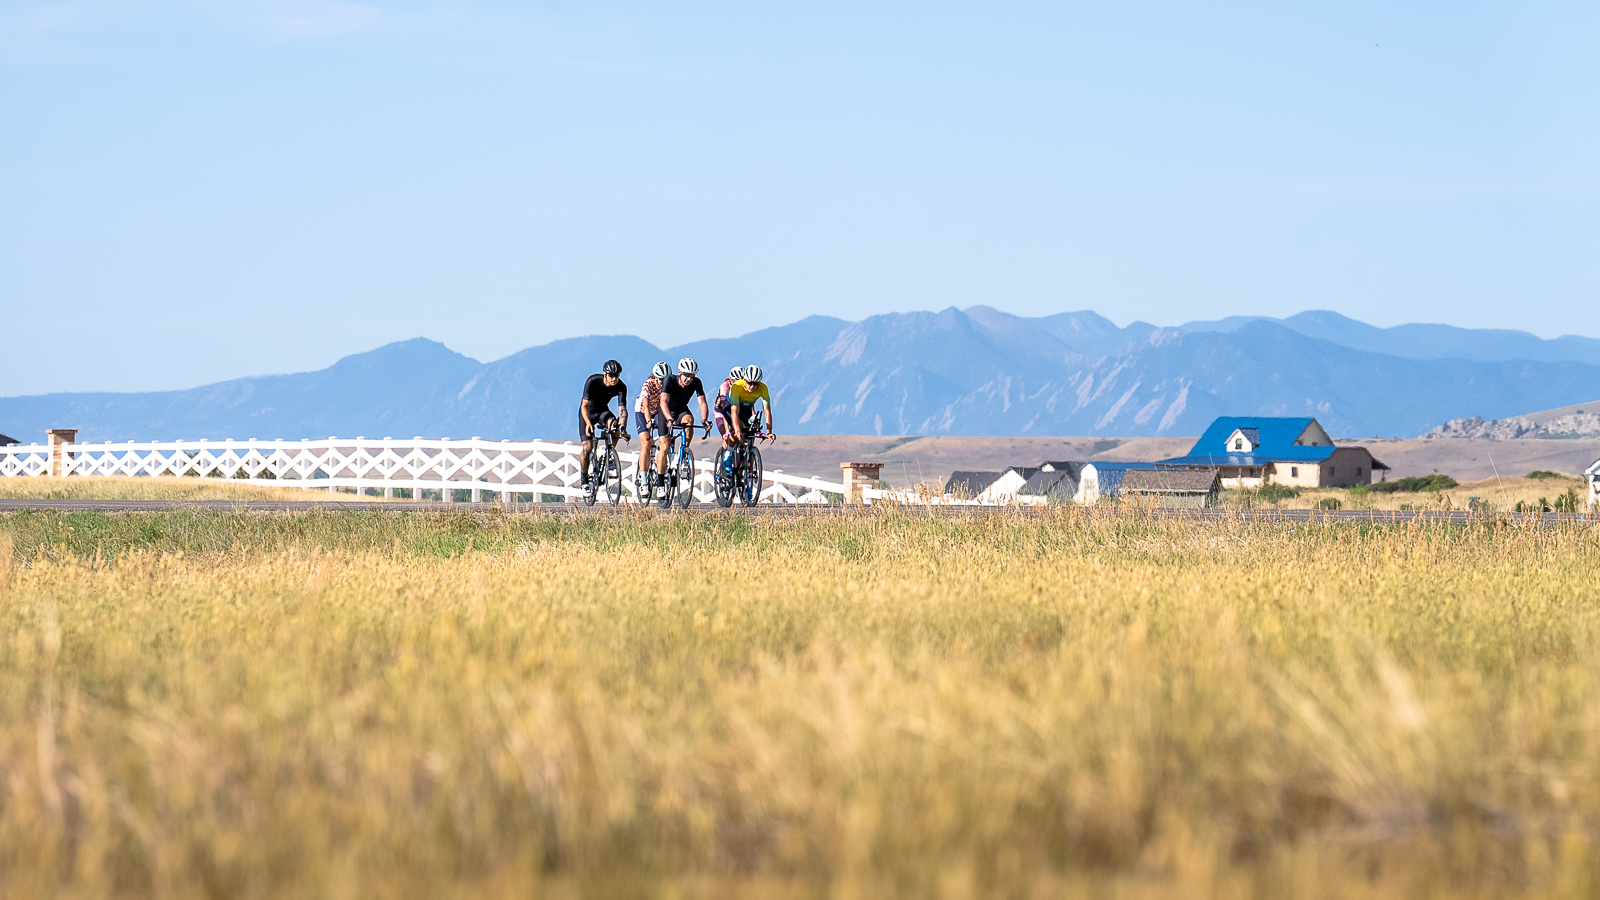 A group of strong cyclists affiliated with Fast Talk Labs rides along a fence with a farm and mountains in the background near Boulder, Colorado.